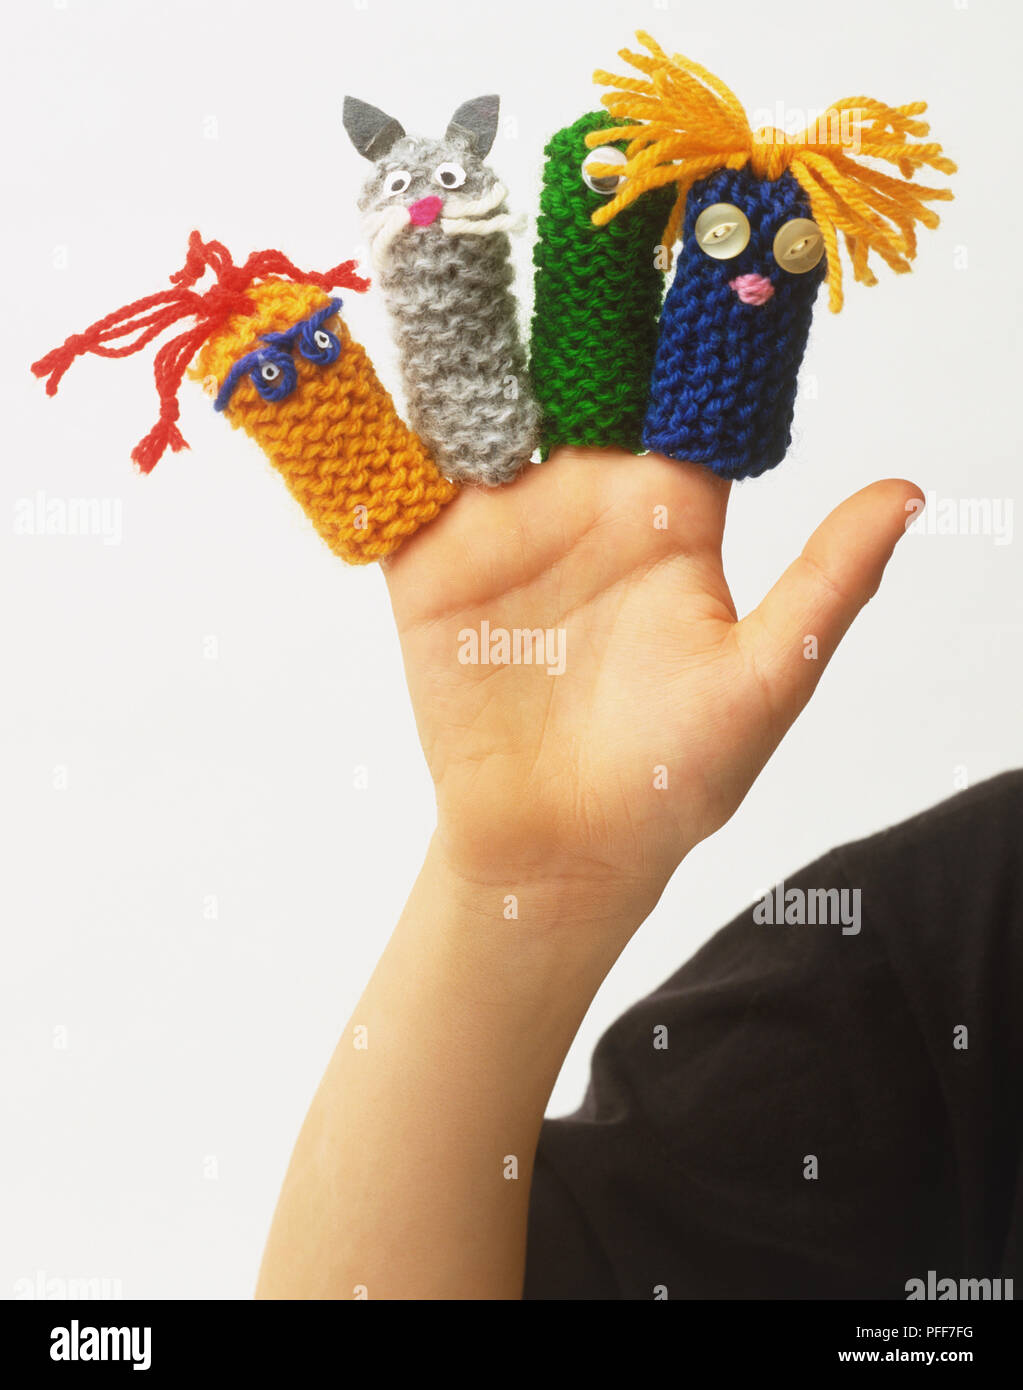 Four woolen finger puppets on a hand Stock Photo